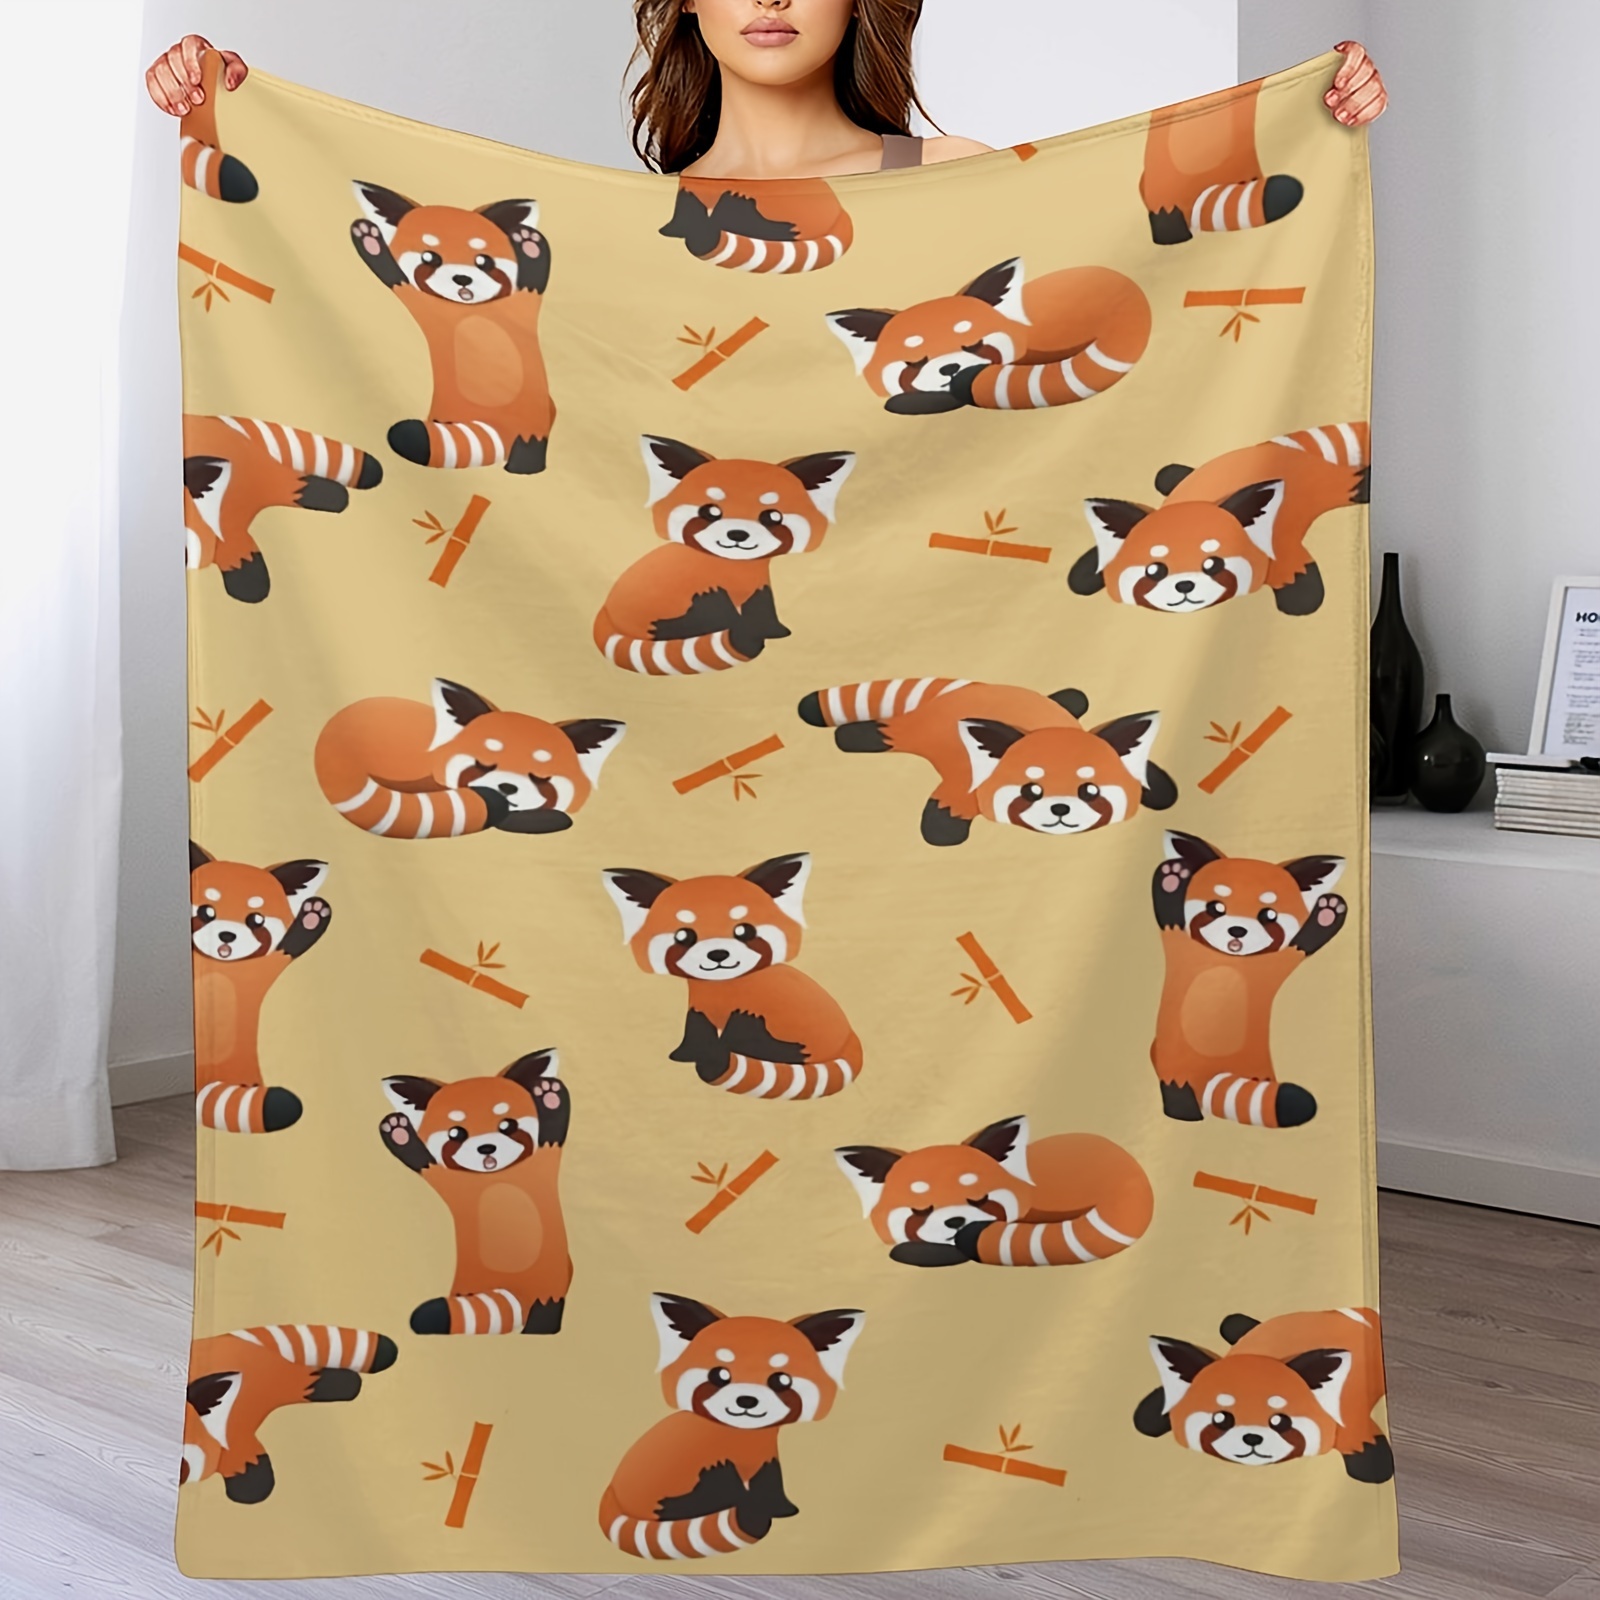 

Flannel Throw Blanket, Cute Red Panda And Bamboo Blanket Home Decor Perfect For Car, Bed And Sofa Blankets For All Season Microfiber Durable Couch Blankets (80x60inch)